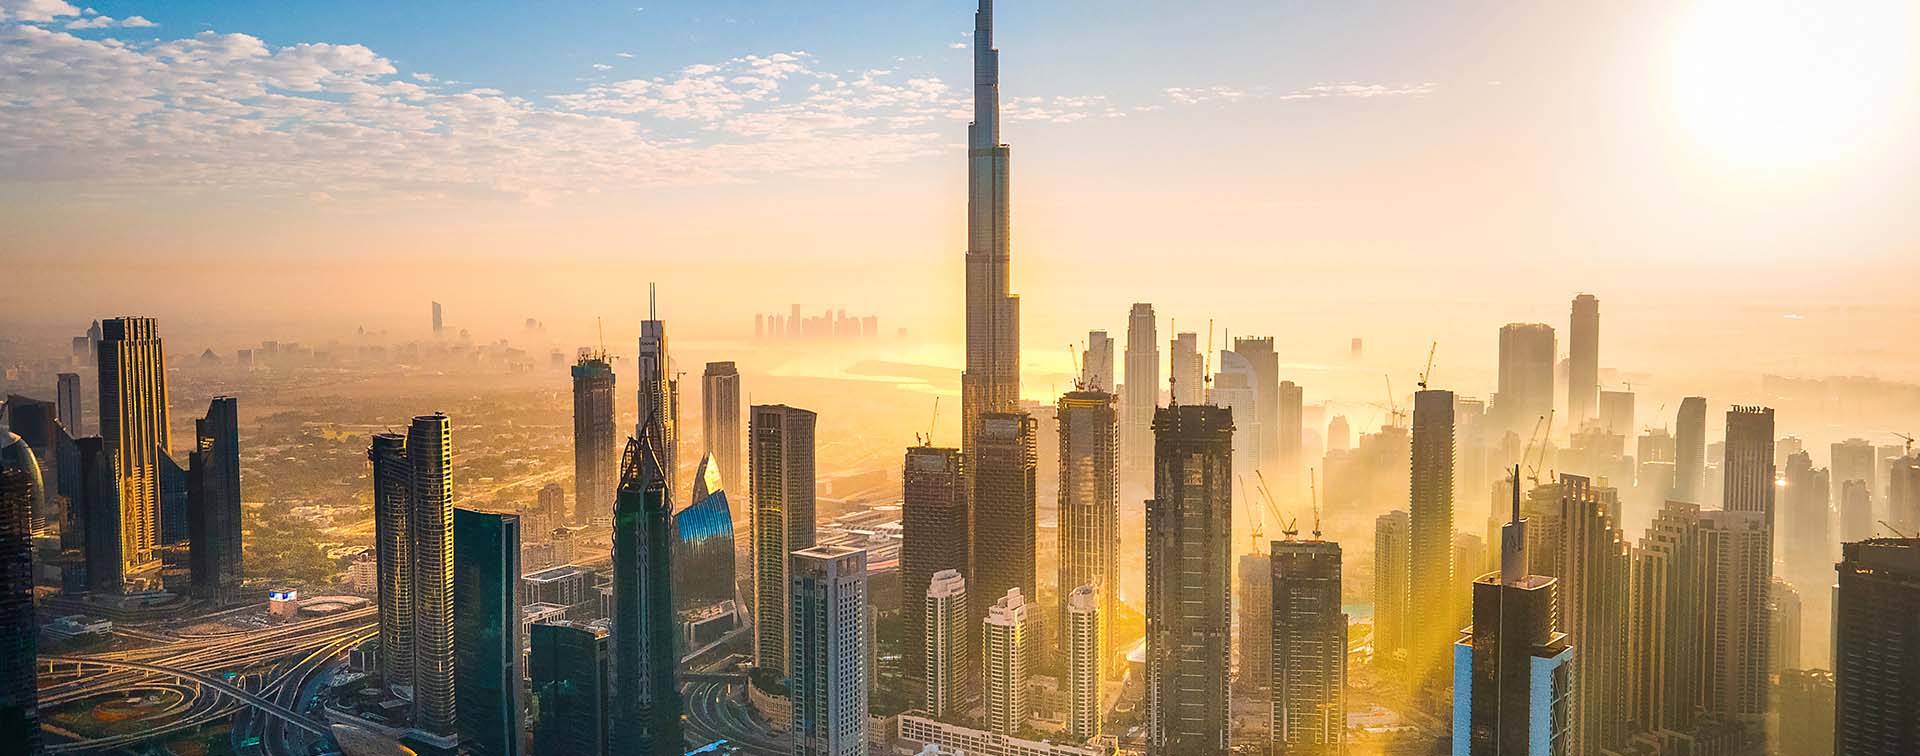 Dubai skyline with the Burj Khalifa in the center and sunshine spreading between the buildings